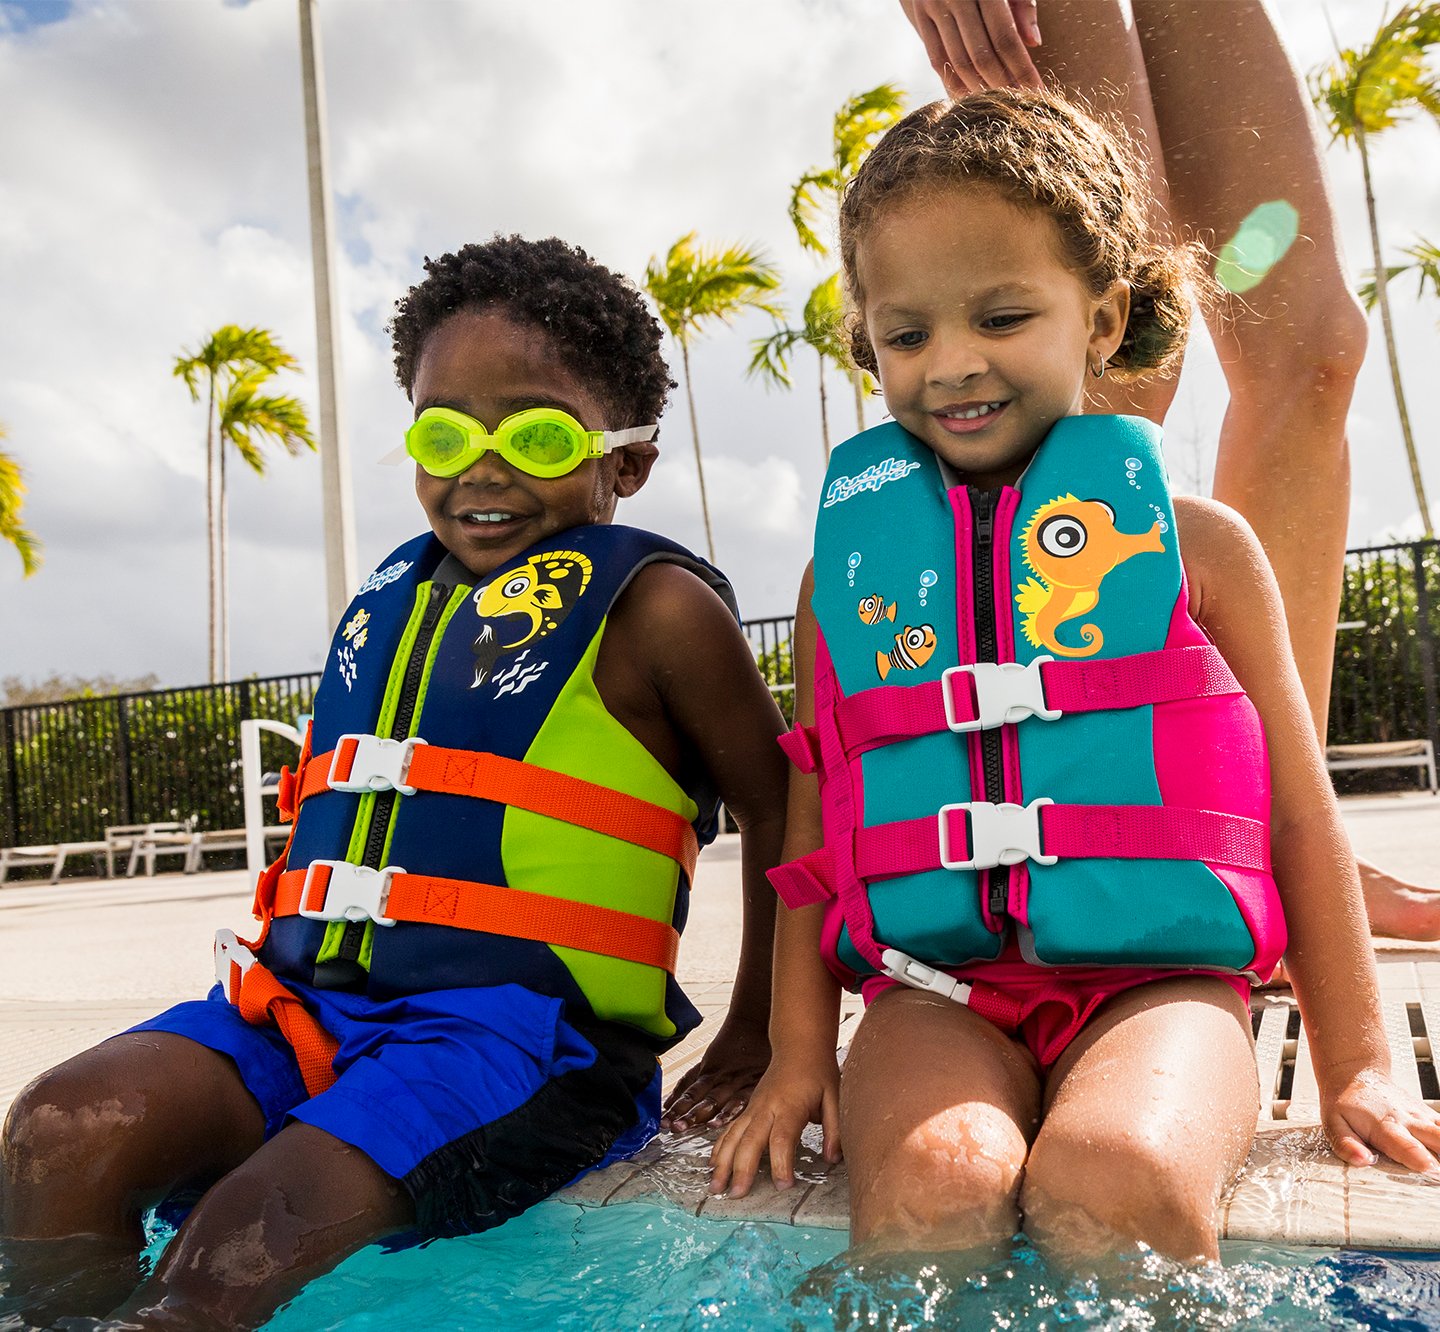 Puddle Jumper Life Jackets: Essential Guide for Kids' Safety